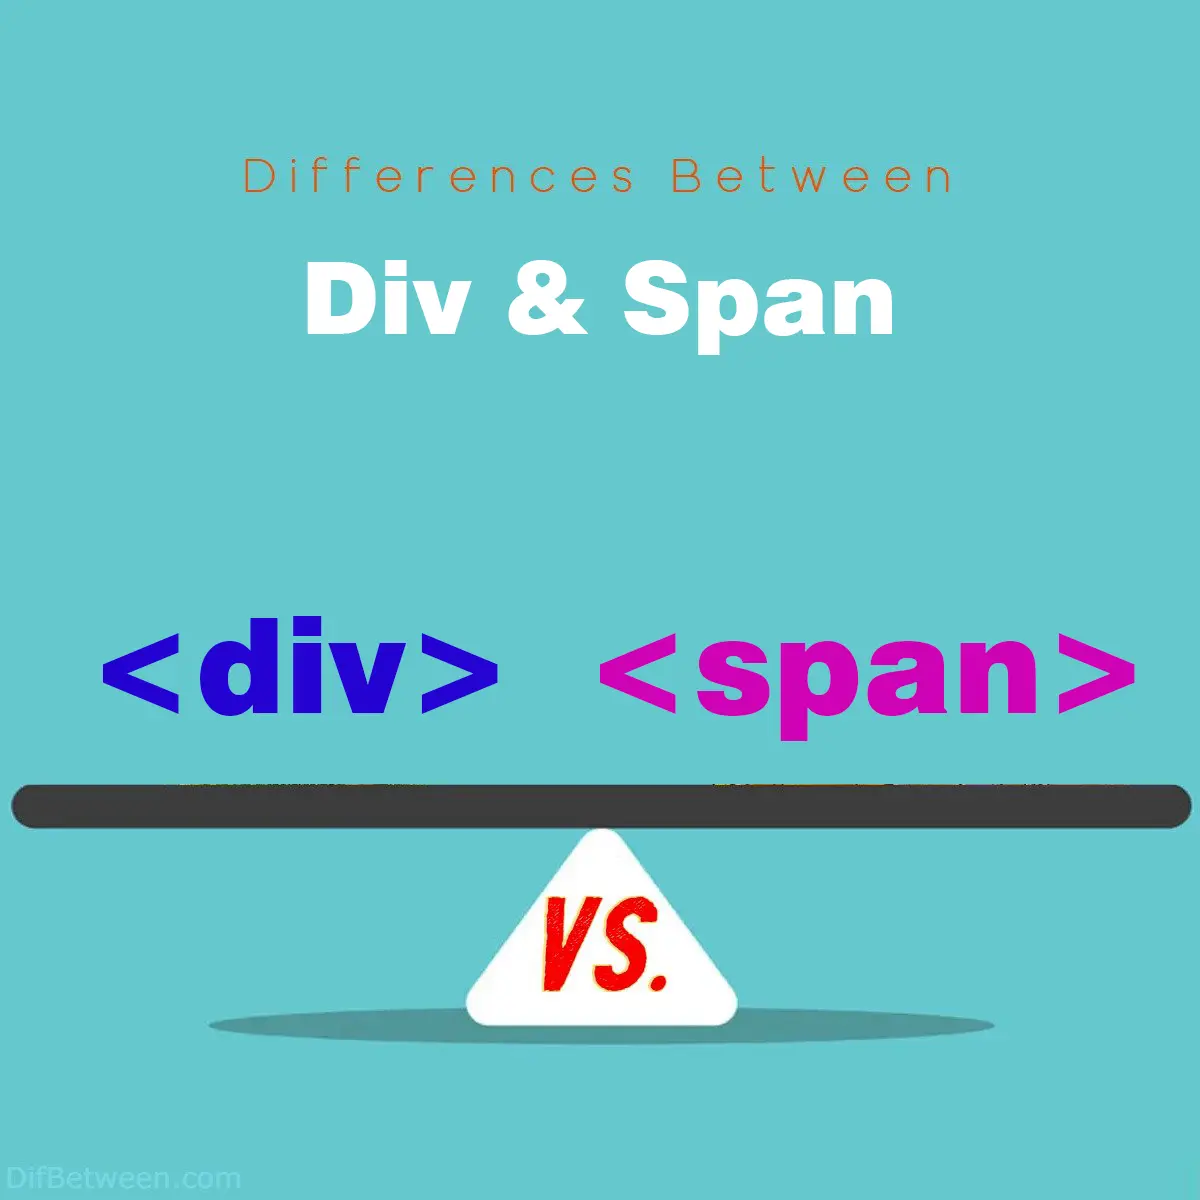 Differences Between div vs span